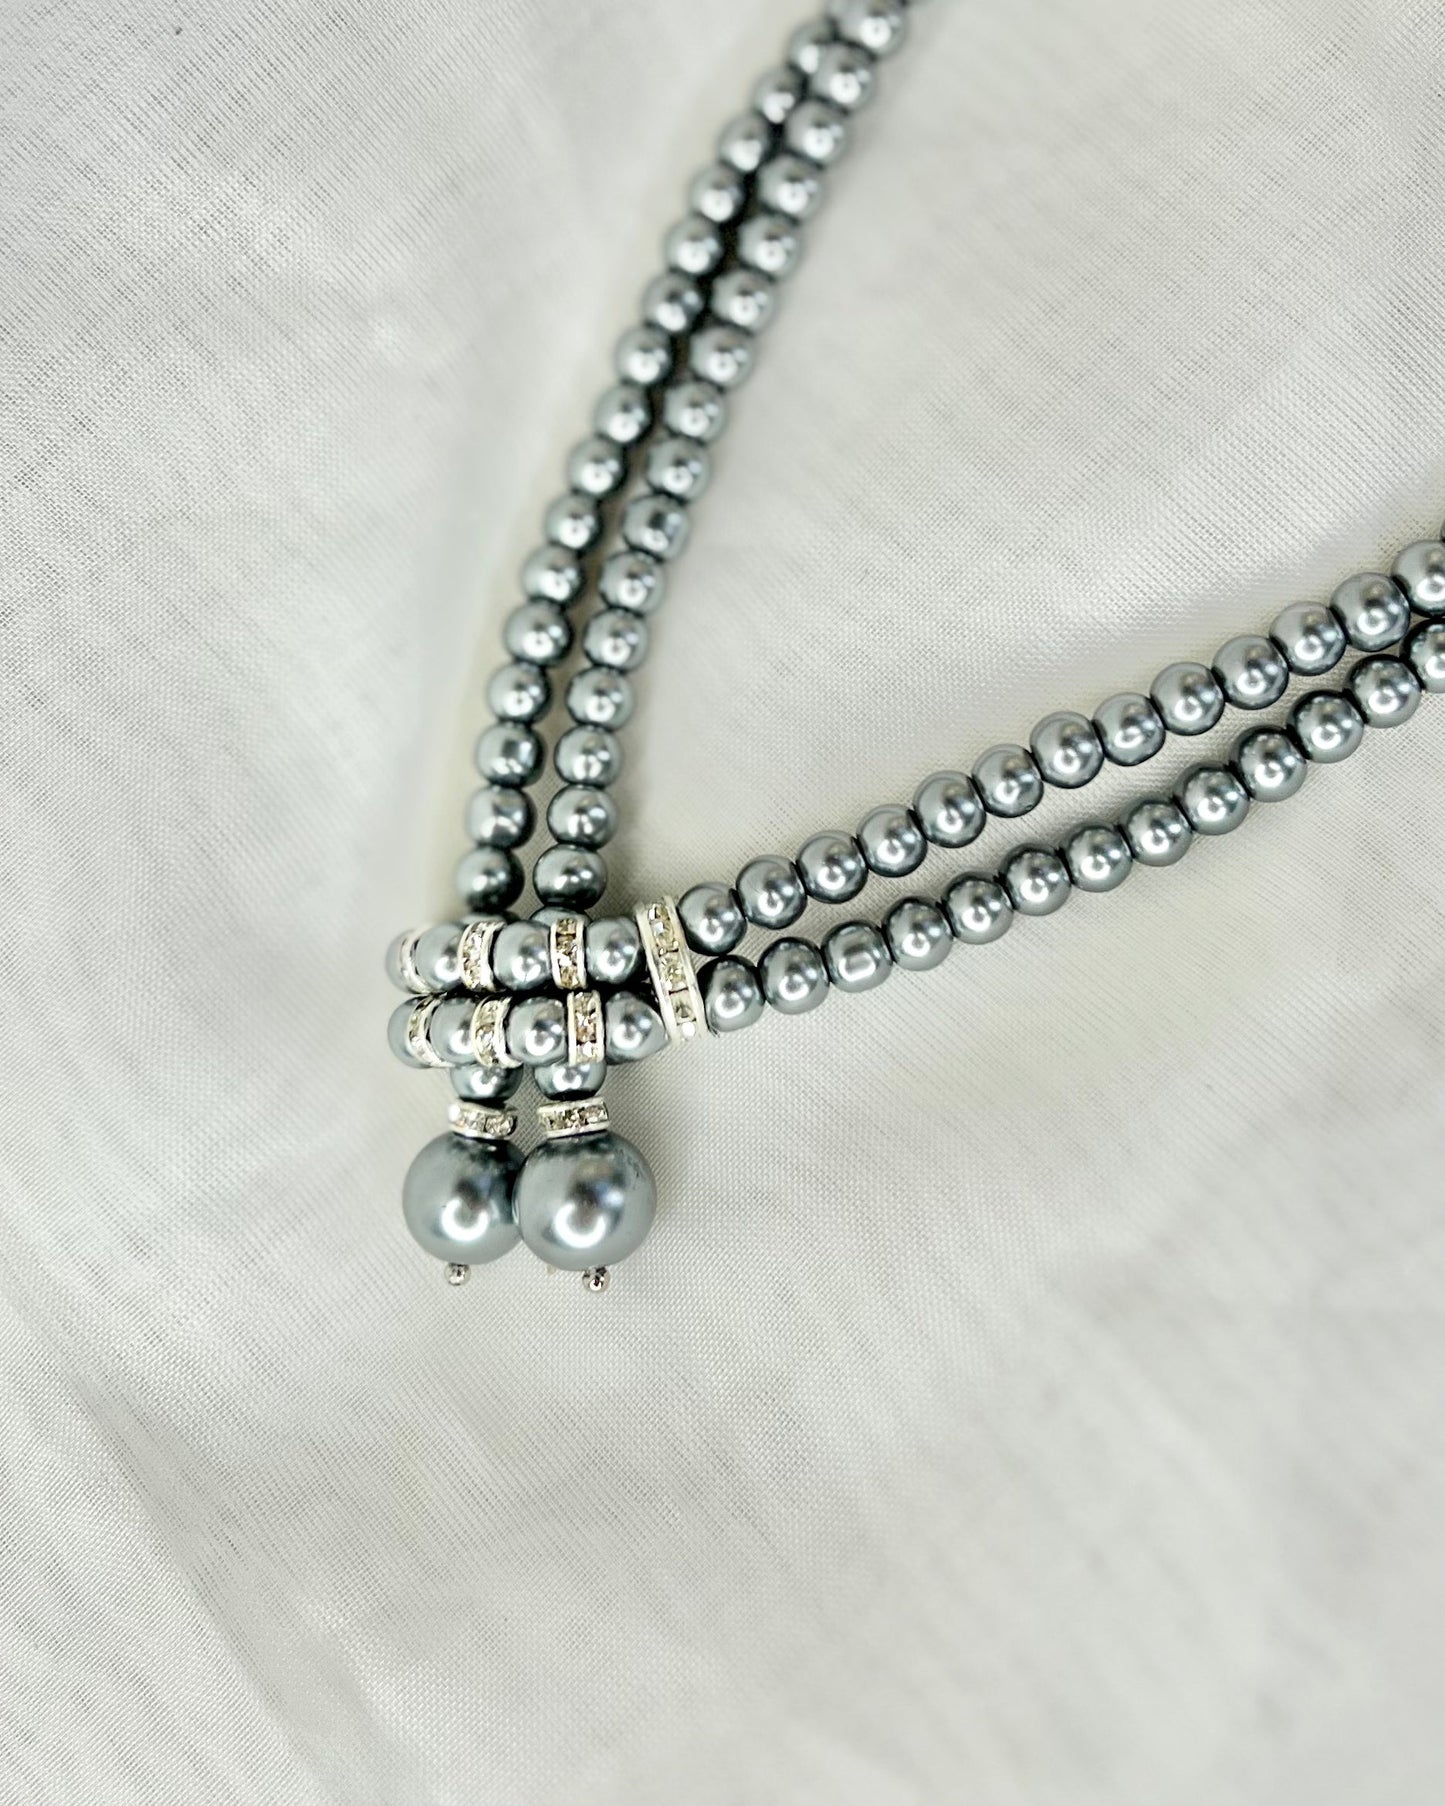 Gatsby Necklace - Pearl Strand: Our beaded necklaces are the perfect addition to your next Gatsby inspired event. These gorgeous designs can also be incorporated into modern outfit
This stunning de - Ciao Bella Dresses 